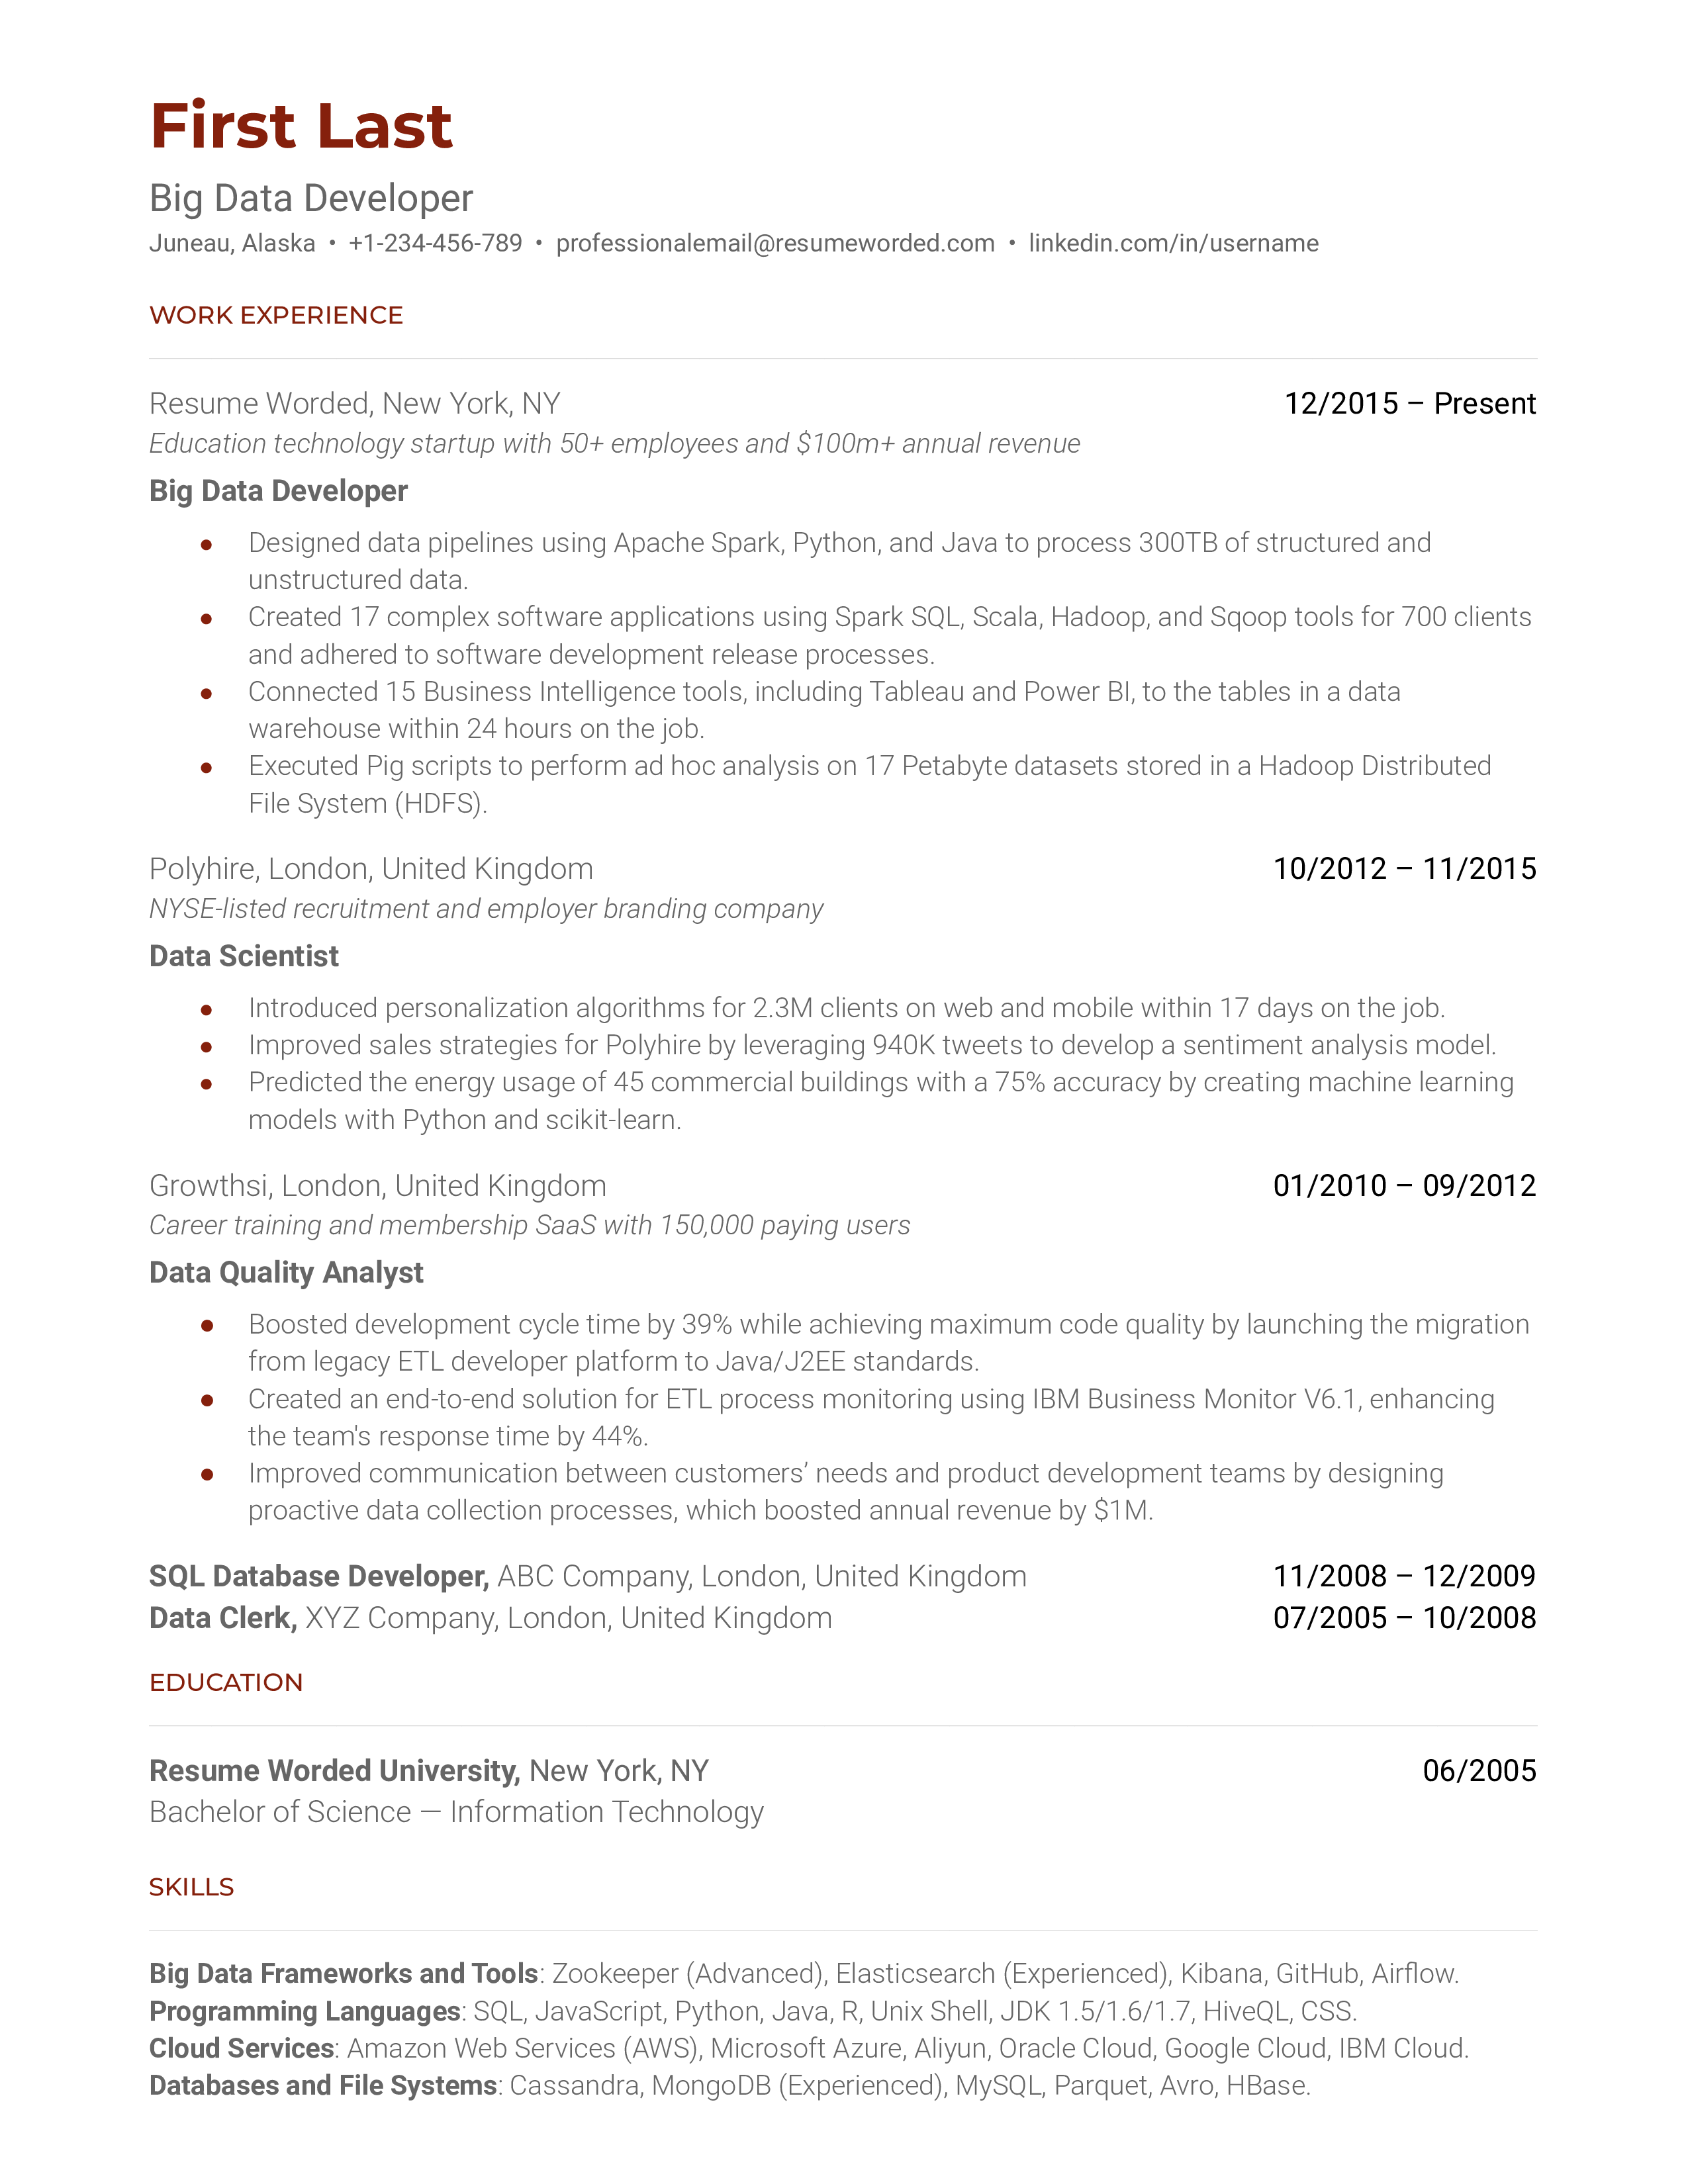 A big data developer resume template that highlights professional experience